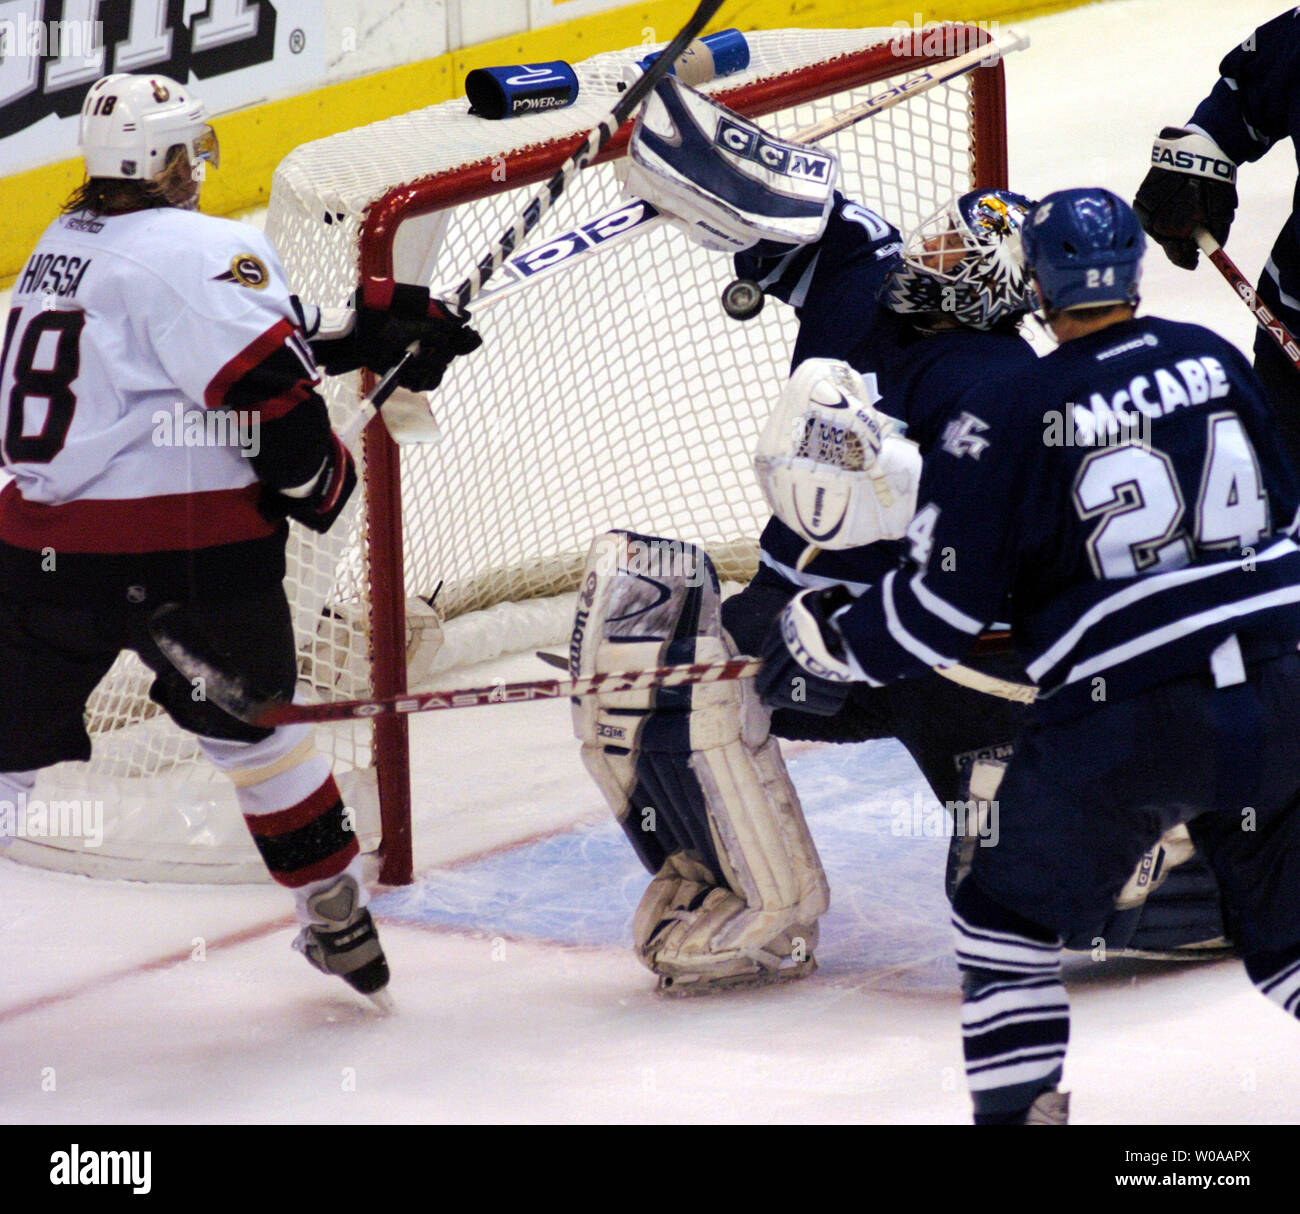 Toronto Maple Leafs' goalie Ed Belfour makes a save off a shot by Ottawa Senators' Marian Hossa(no. 18) during second period action in Game 7 of their series in the first round of the NHL playoffs at the Air Canada Center in Toronto, Canada on Apr. 20, 2004. Belfour made 36 saves in the game and was the man of the match as the Leafs defeated the Senators 4-1 to advance to the next round. (UPI Photo/Christine Chew) Stock Photo